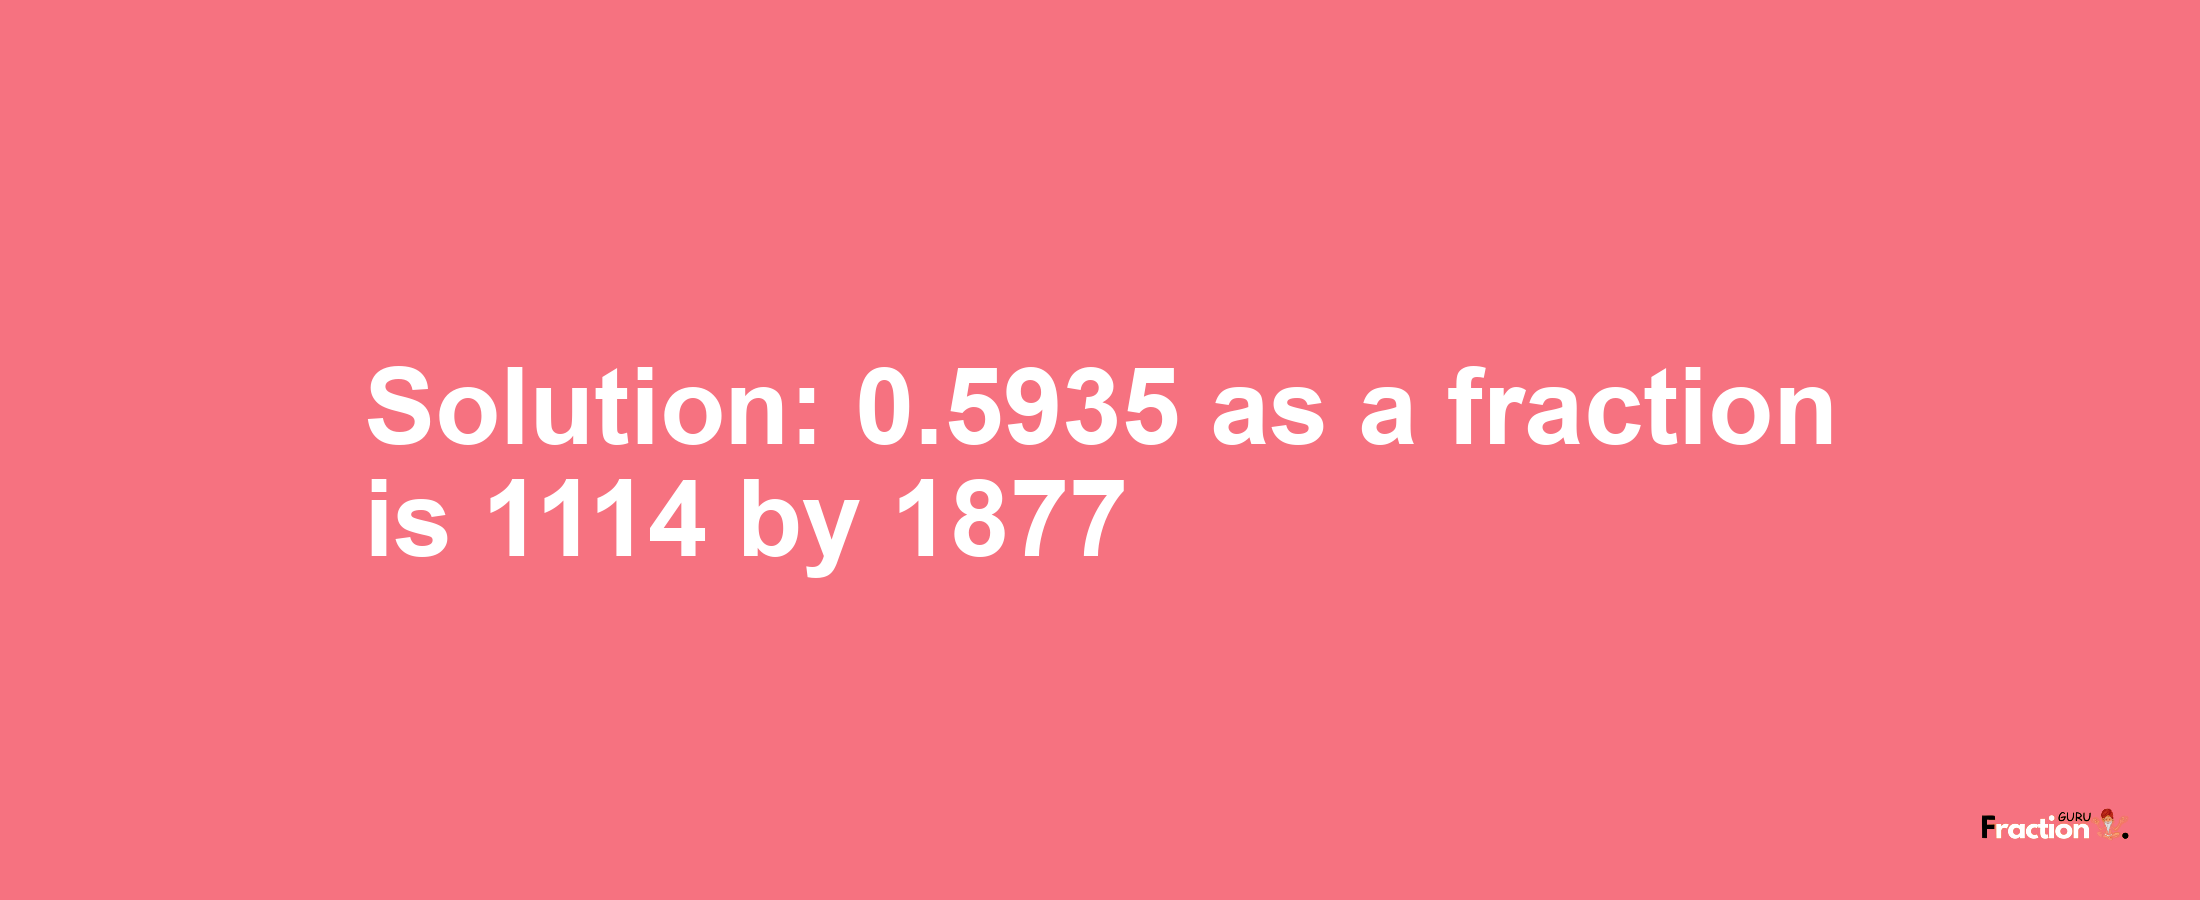 Solution:0.5935 as a fraction is 1114/1877